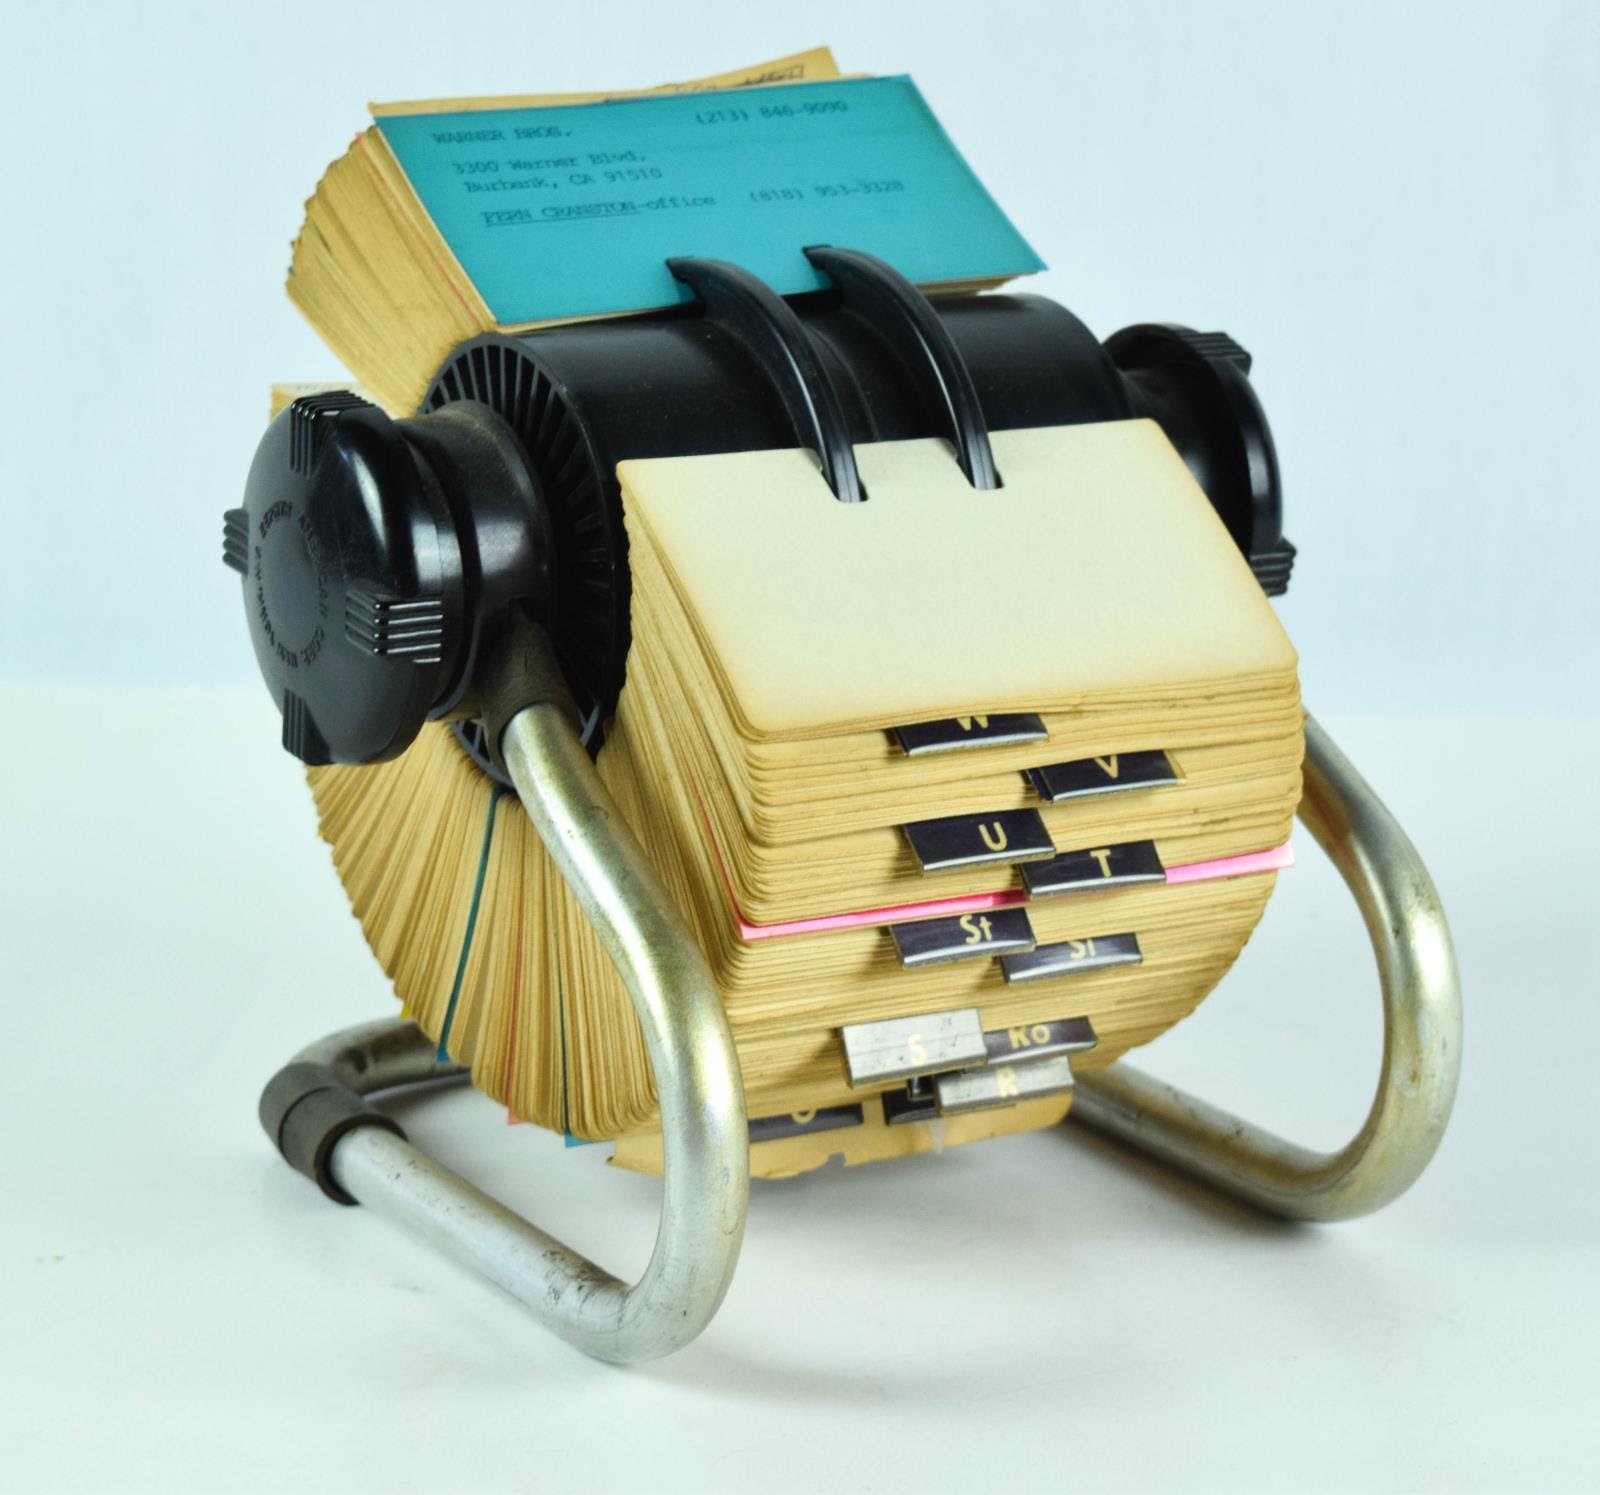 GD rolodex will be auctioned off